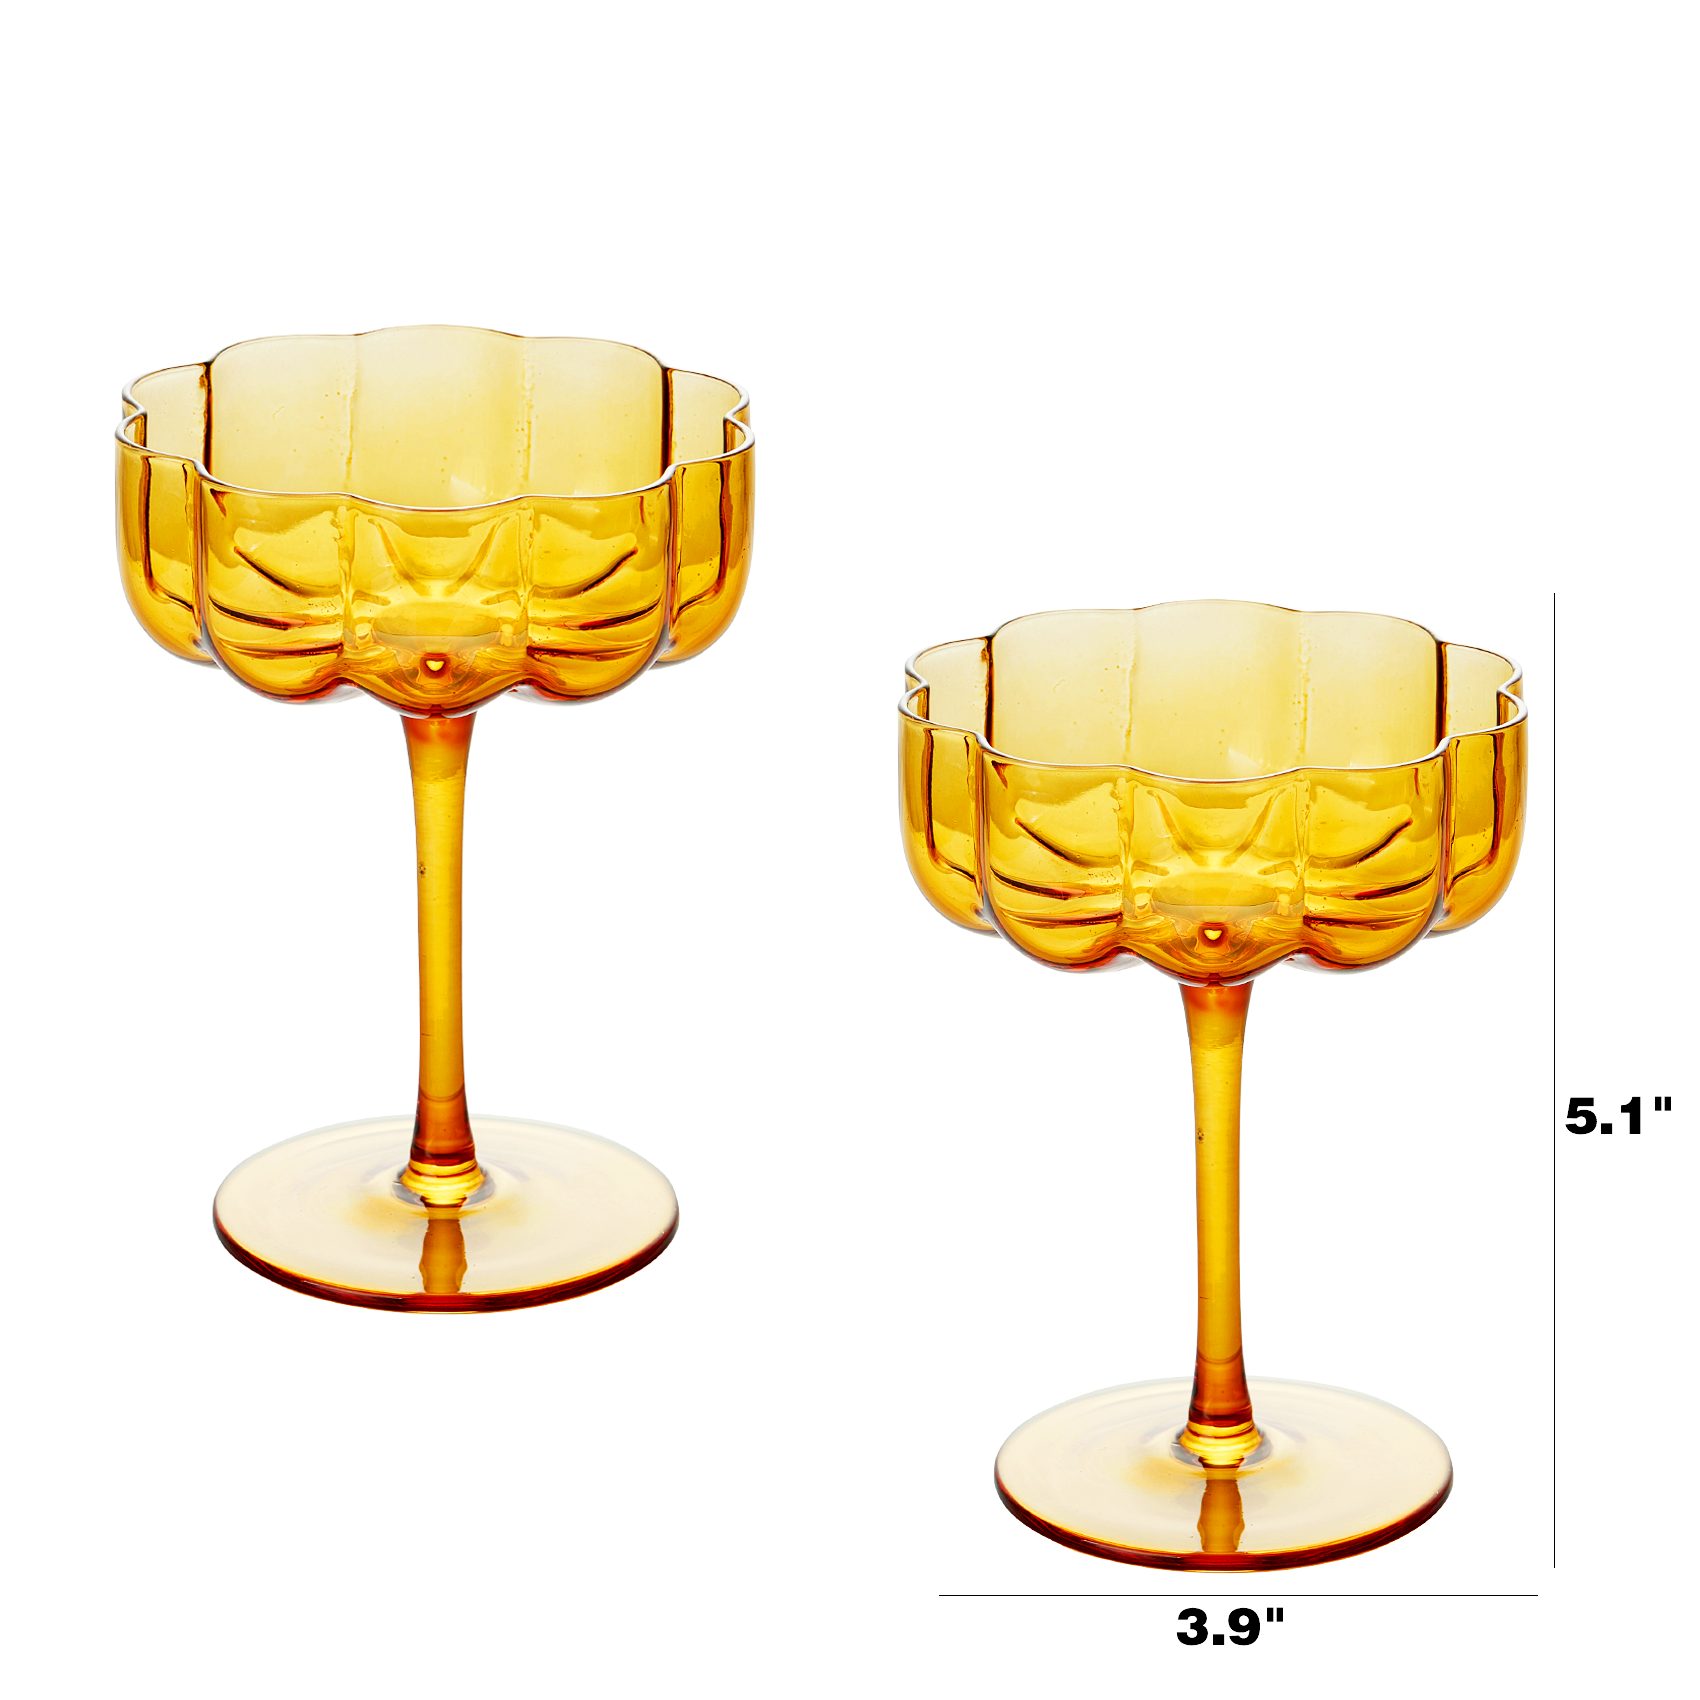 Flower Vintage Wavy Petals Wave Glass Coupes 7oz Colorful Cocktail, - Set  of 4 - Rippled & Champagne Glasses, Prosecco, Martini, Mimosa, Cocktail  Set